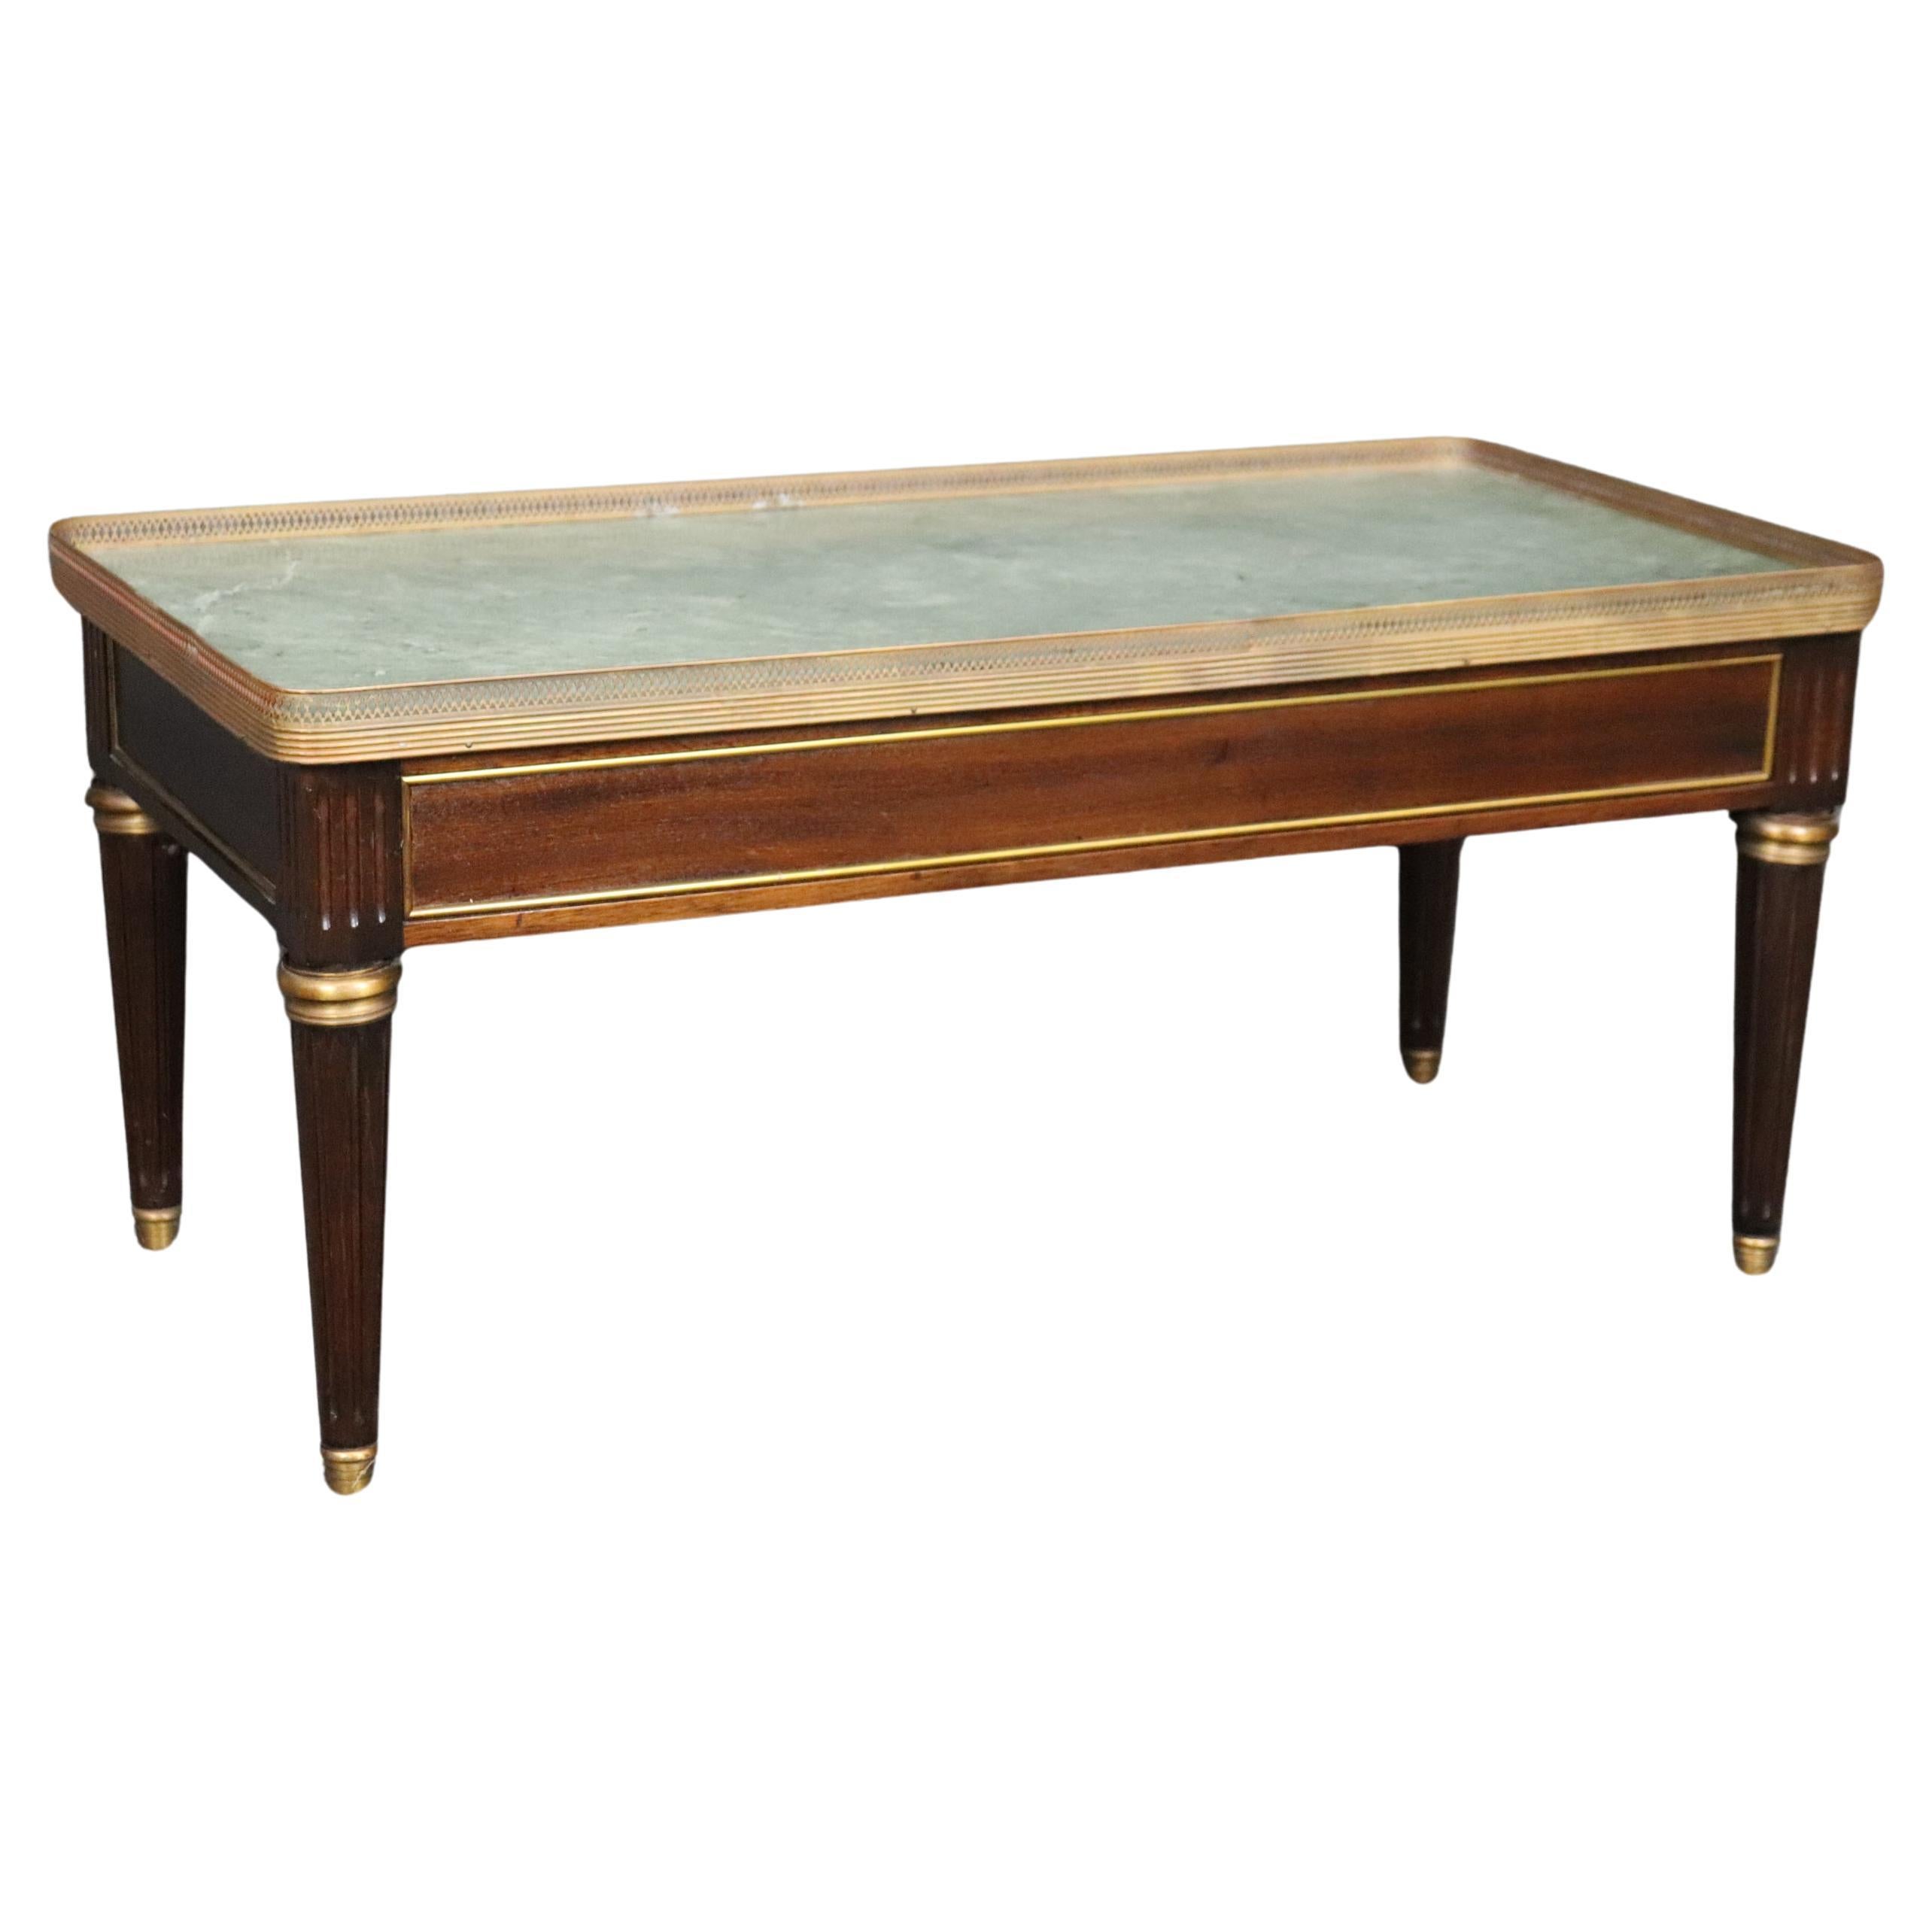 Louis XVI Style Marble Top Coffee Table Attributed to Maison Jansen For Sale